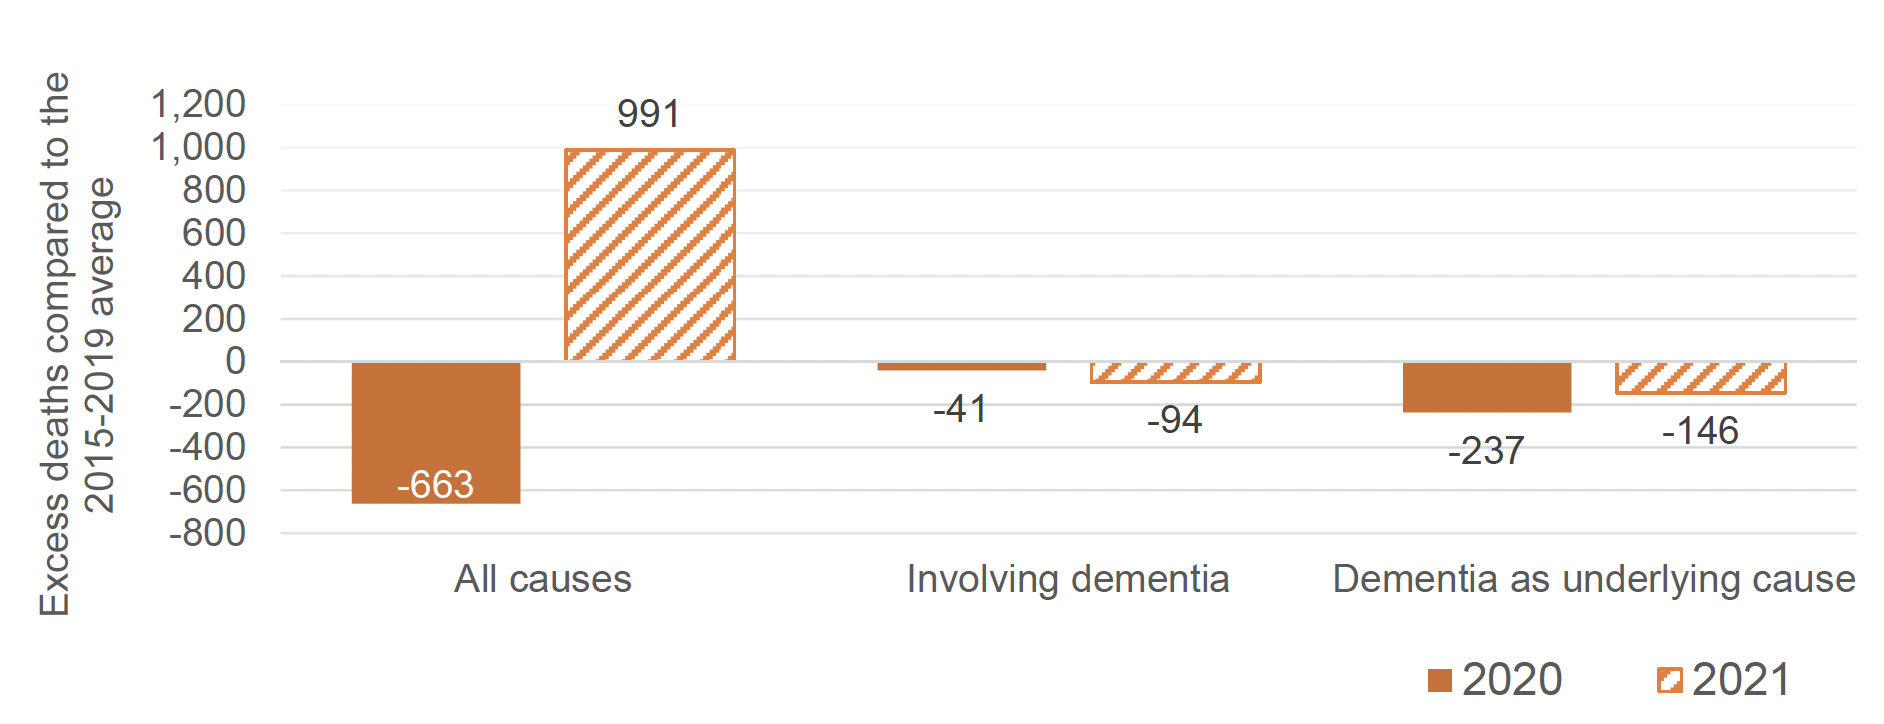 Figure 6: Column chart displaying the number of excess deaths in hospitals in 2020 (solid orange) and 2021 (patterned orange) in Scotland compared to the 2015-2019 average; from all causes (left), involving dementia (middle) and dementia as the underlying cause (right).